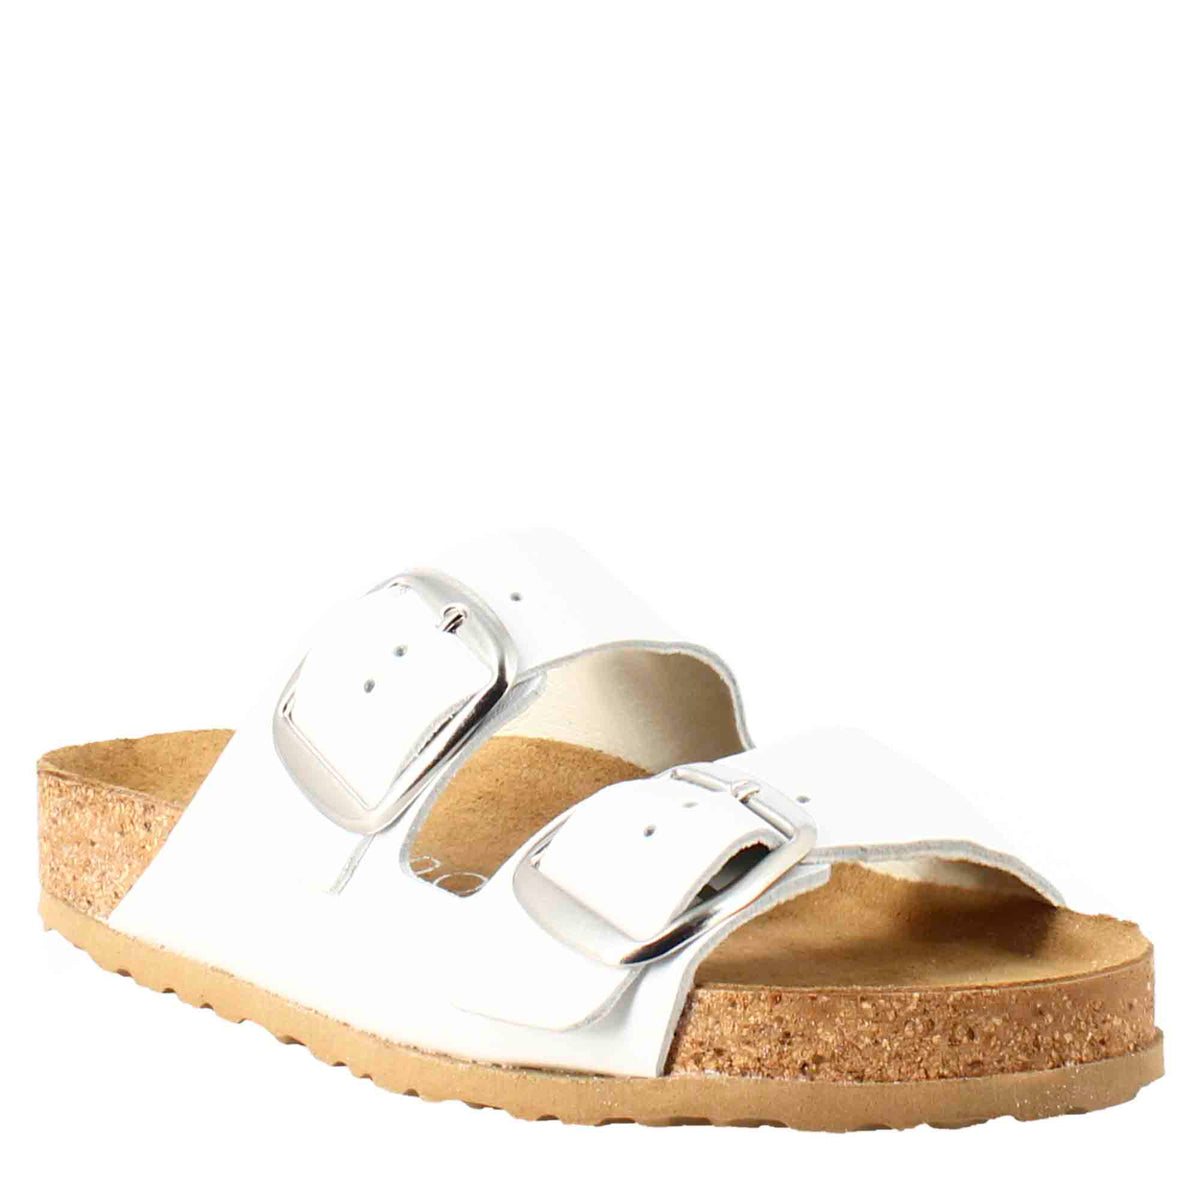 Women's double buckle sandals in white leather